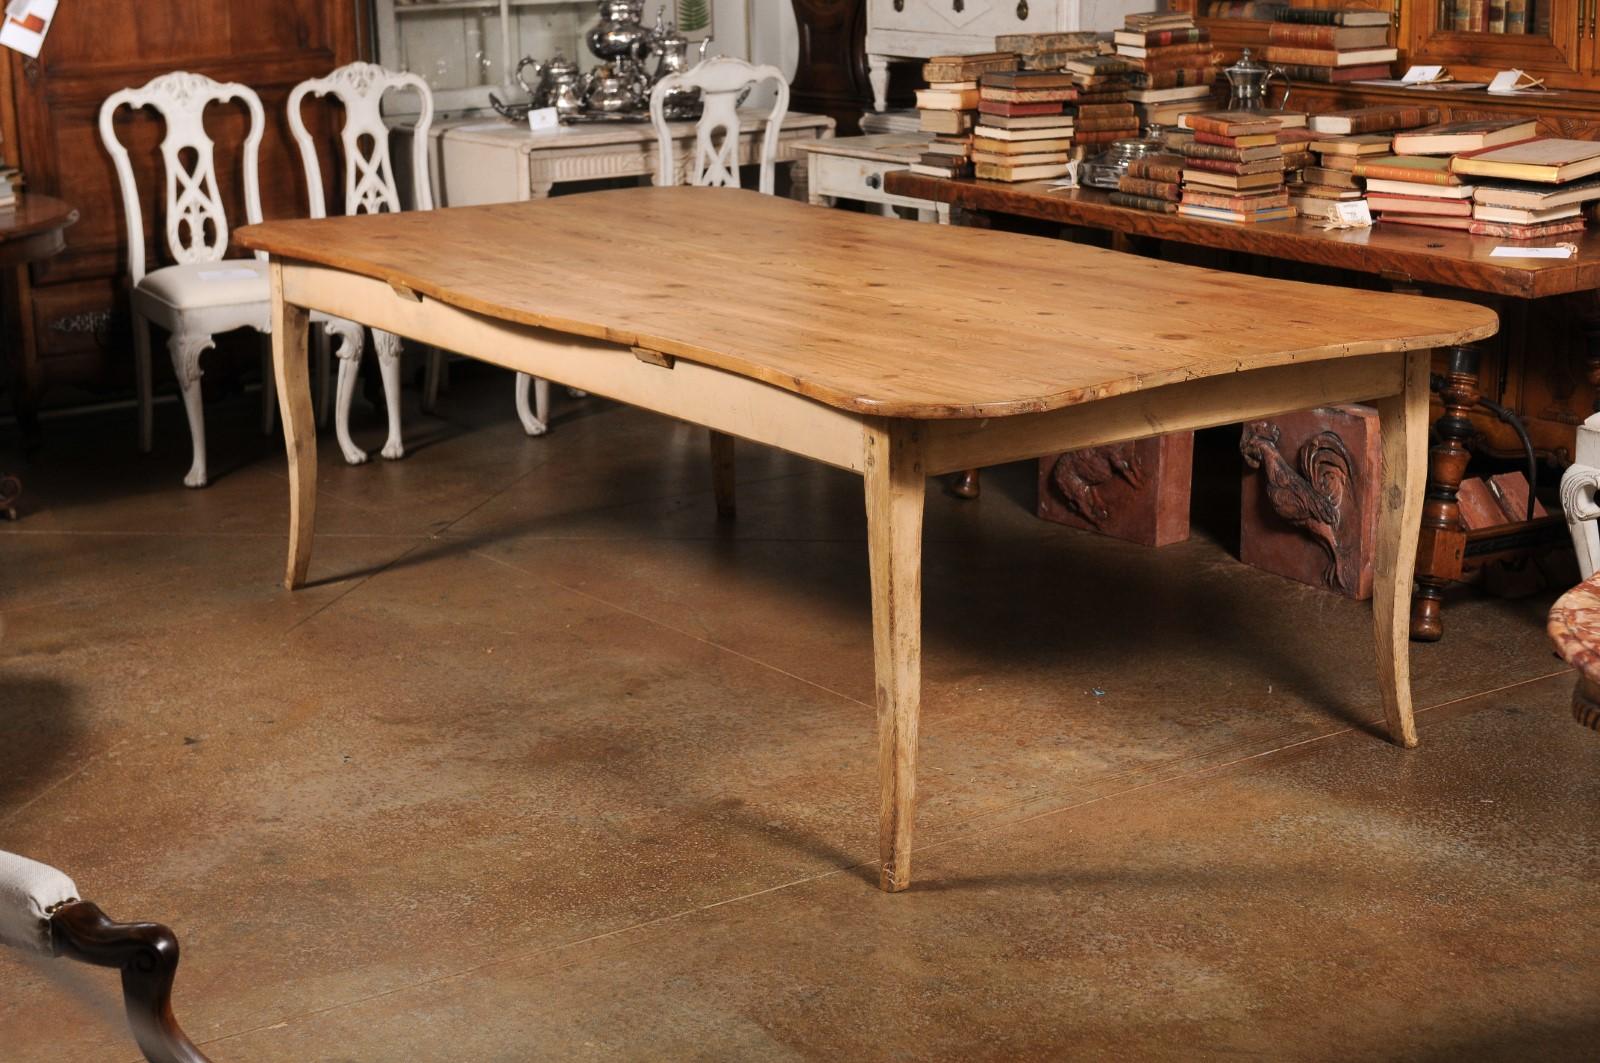 A French Restauration period fir wood farm dining room table from the early 19th century, with planked top, serpentine accents, curving legs and distressed patina. Created in France during the Restauration period which saw a return of the Bourbon